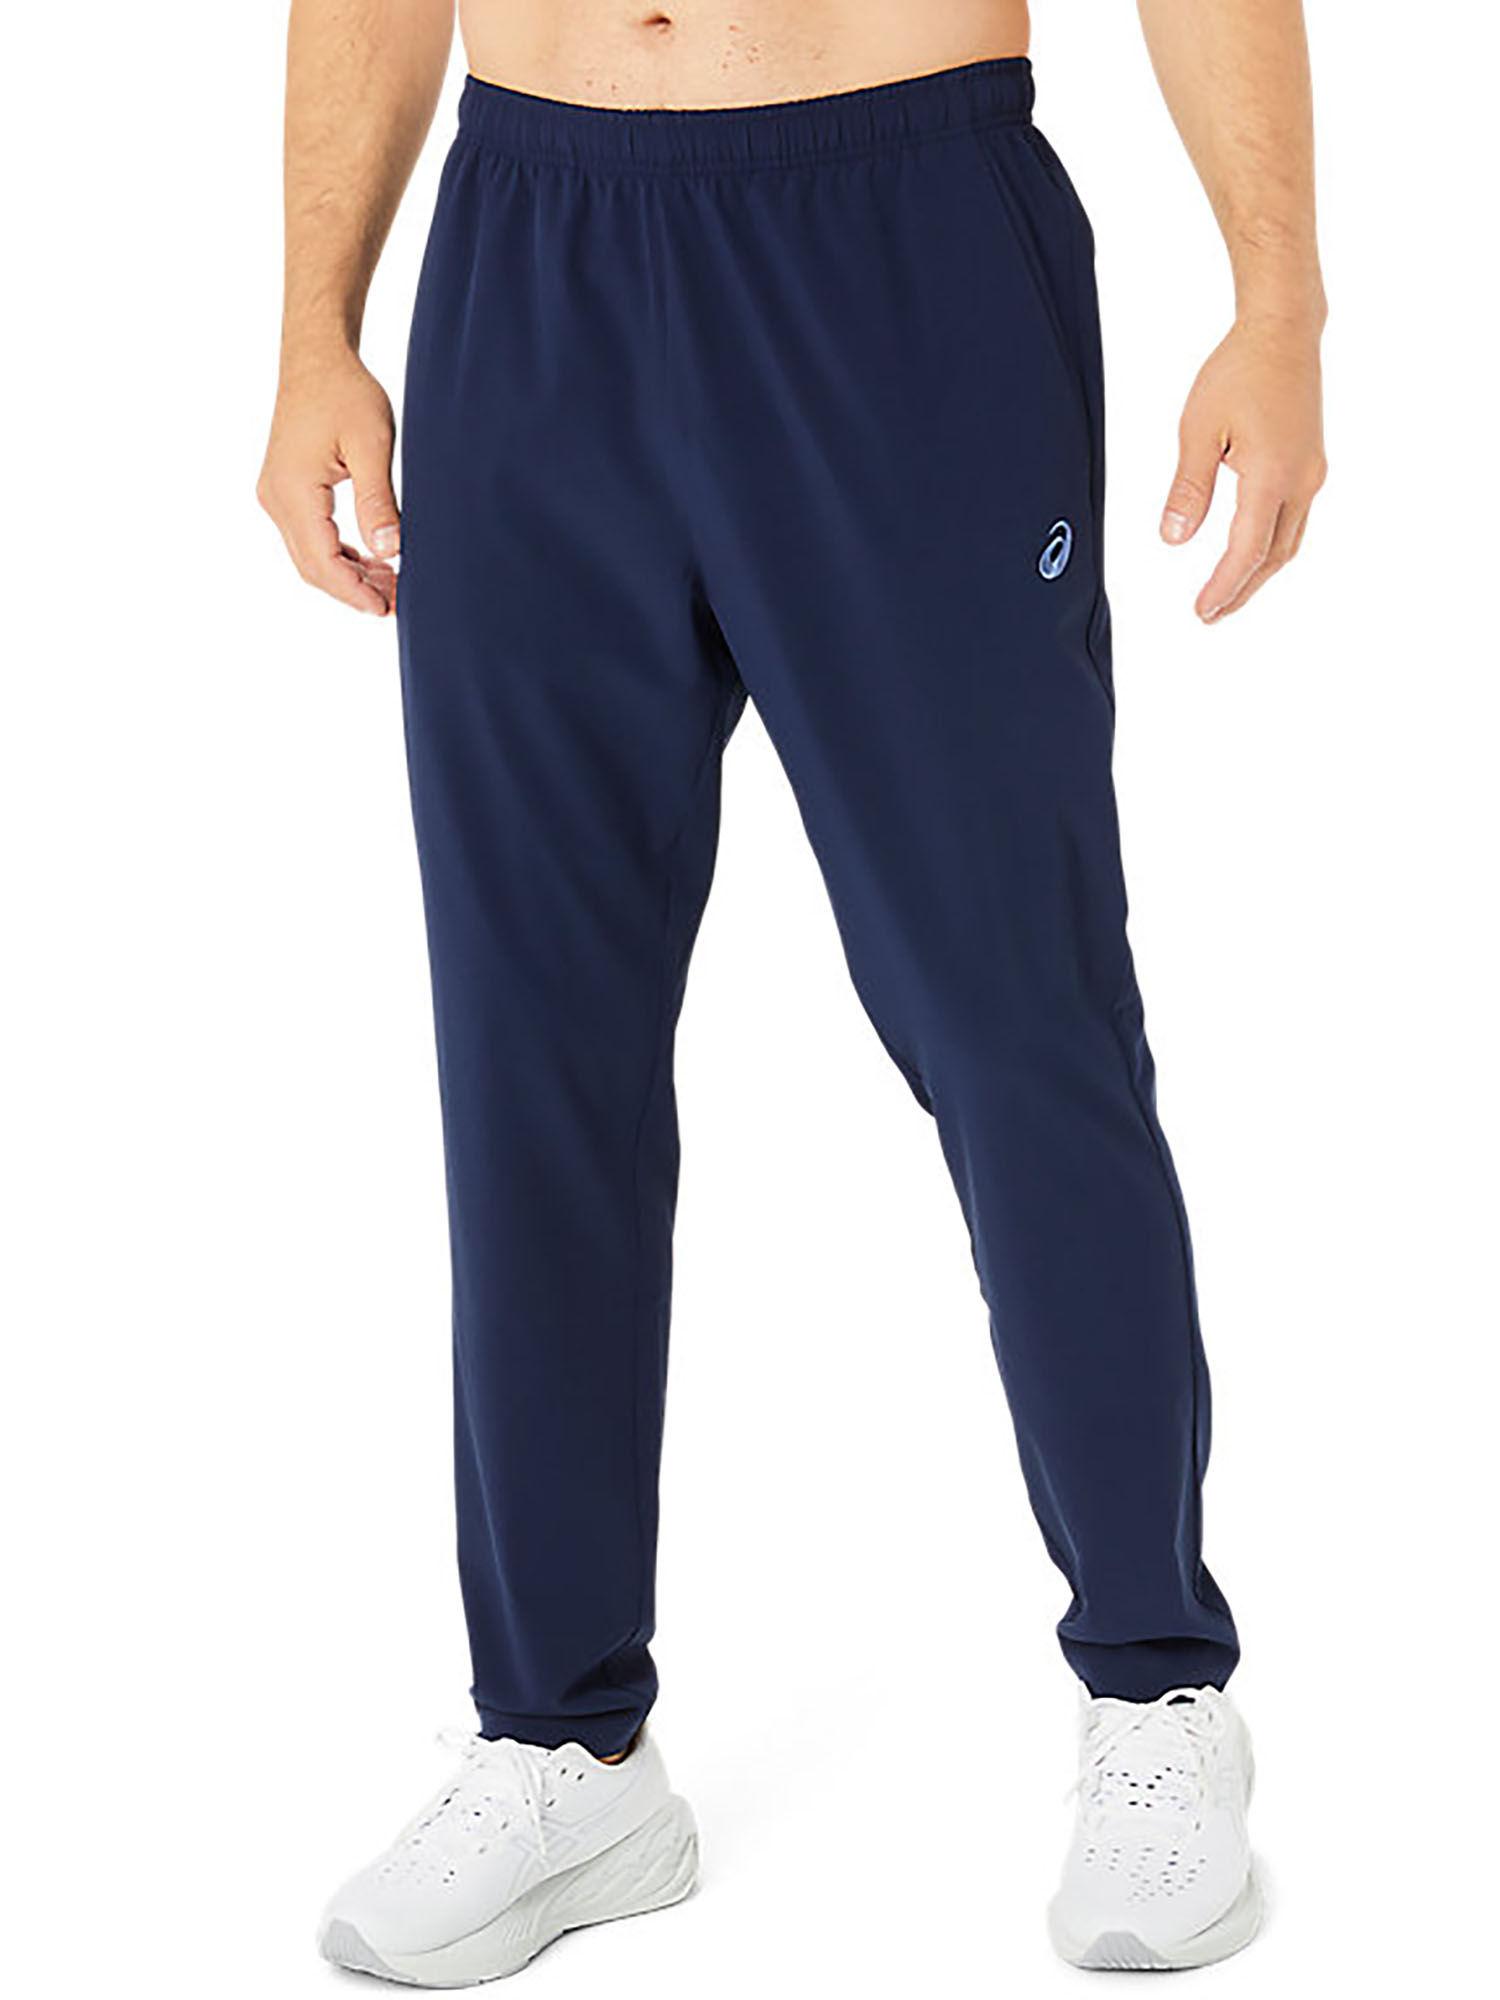 spiral embroidery woven men blue sweatpants